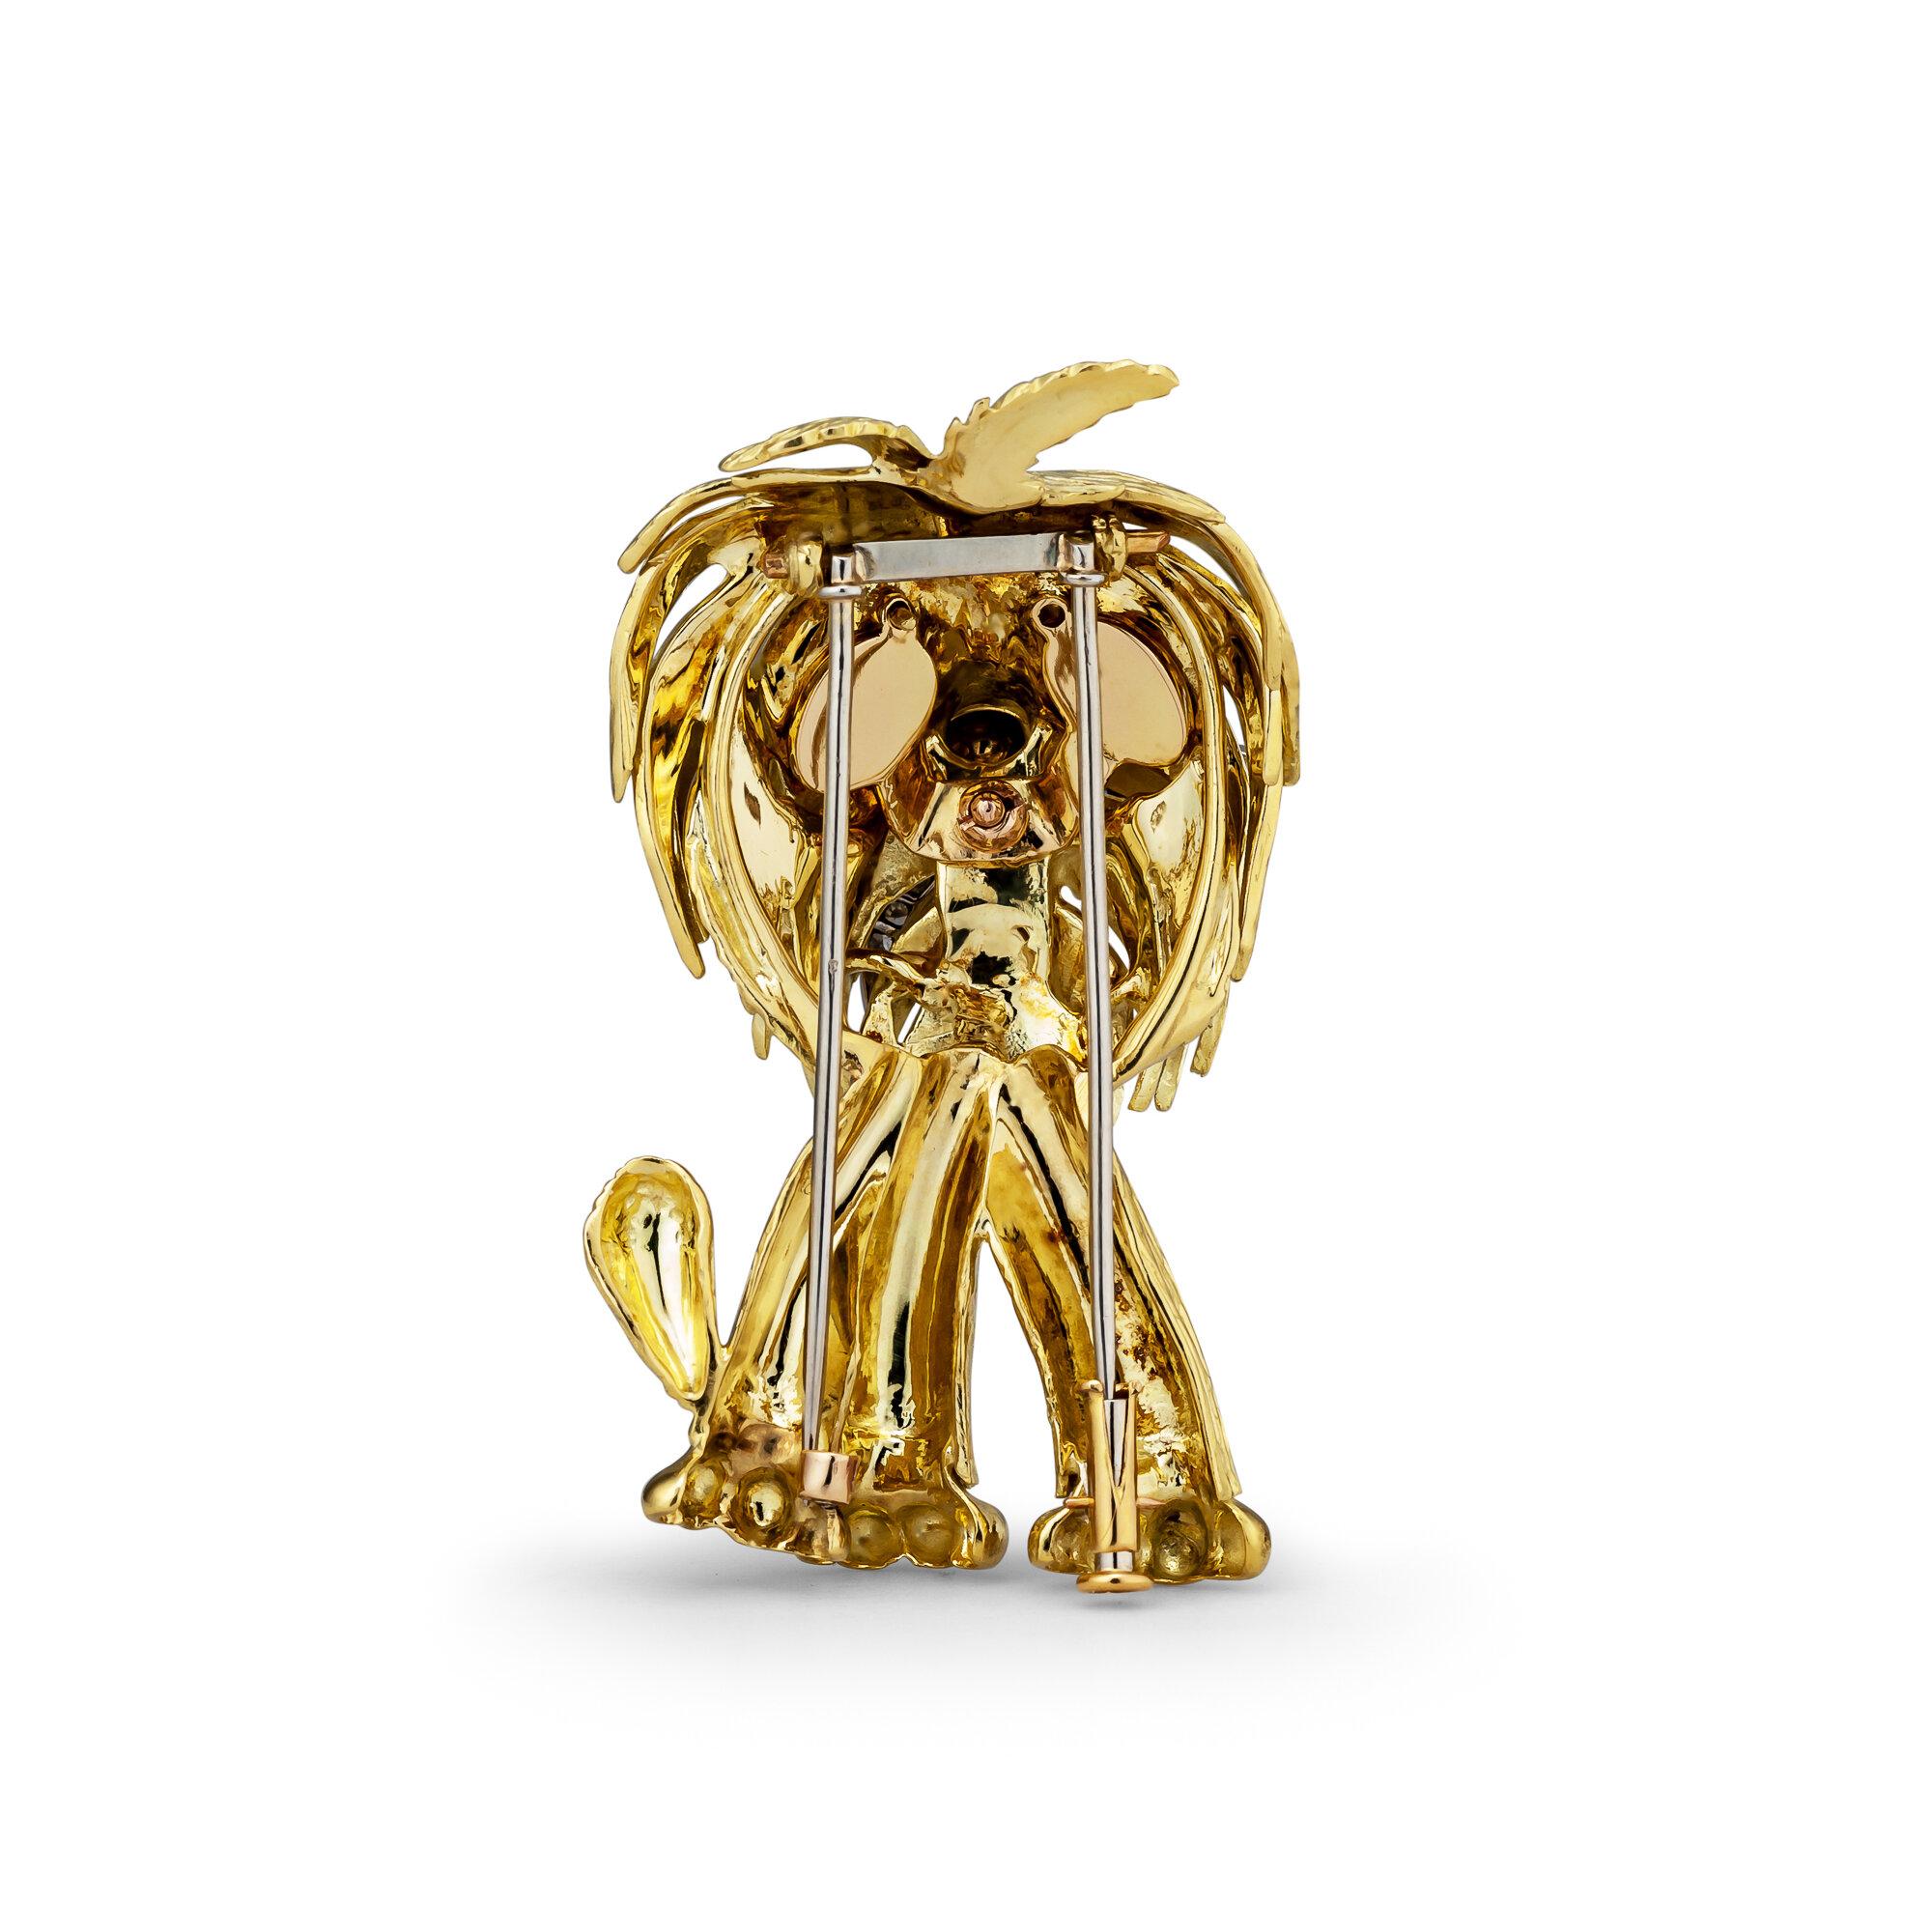 Every dog must have his day, and you will have yours when wearing this French vintage 18 karat yellow gold dog pin.  With diamond whiskers and an enameled tongue, nose, and eyes, this whimsical dog is patiently waiting to make you smile.  Circa